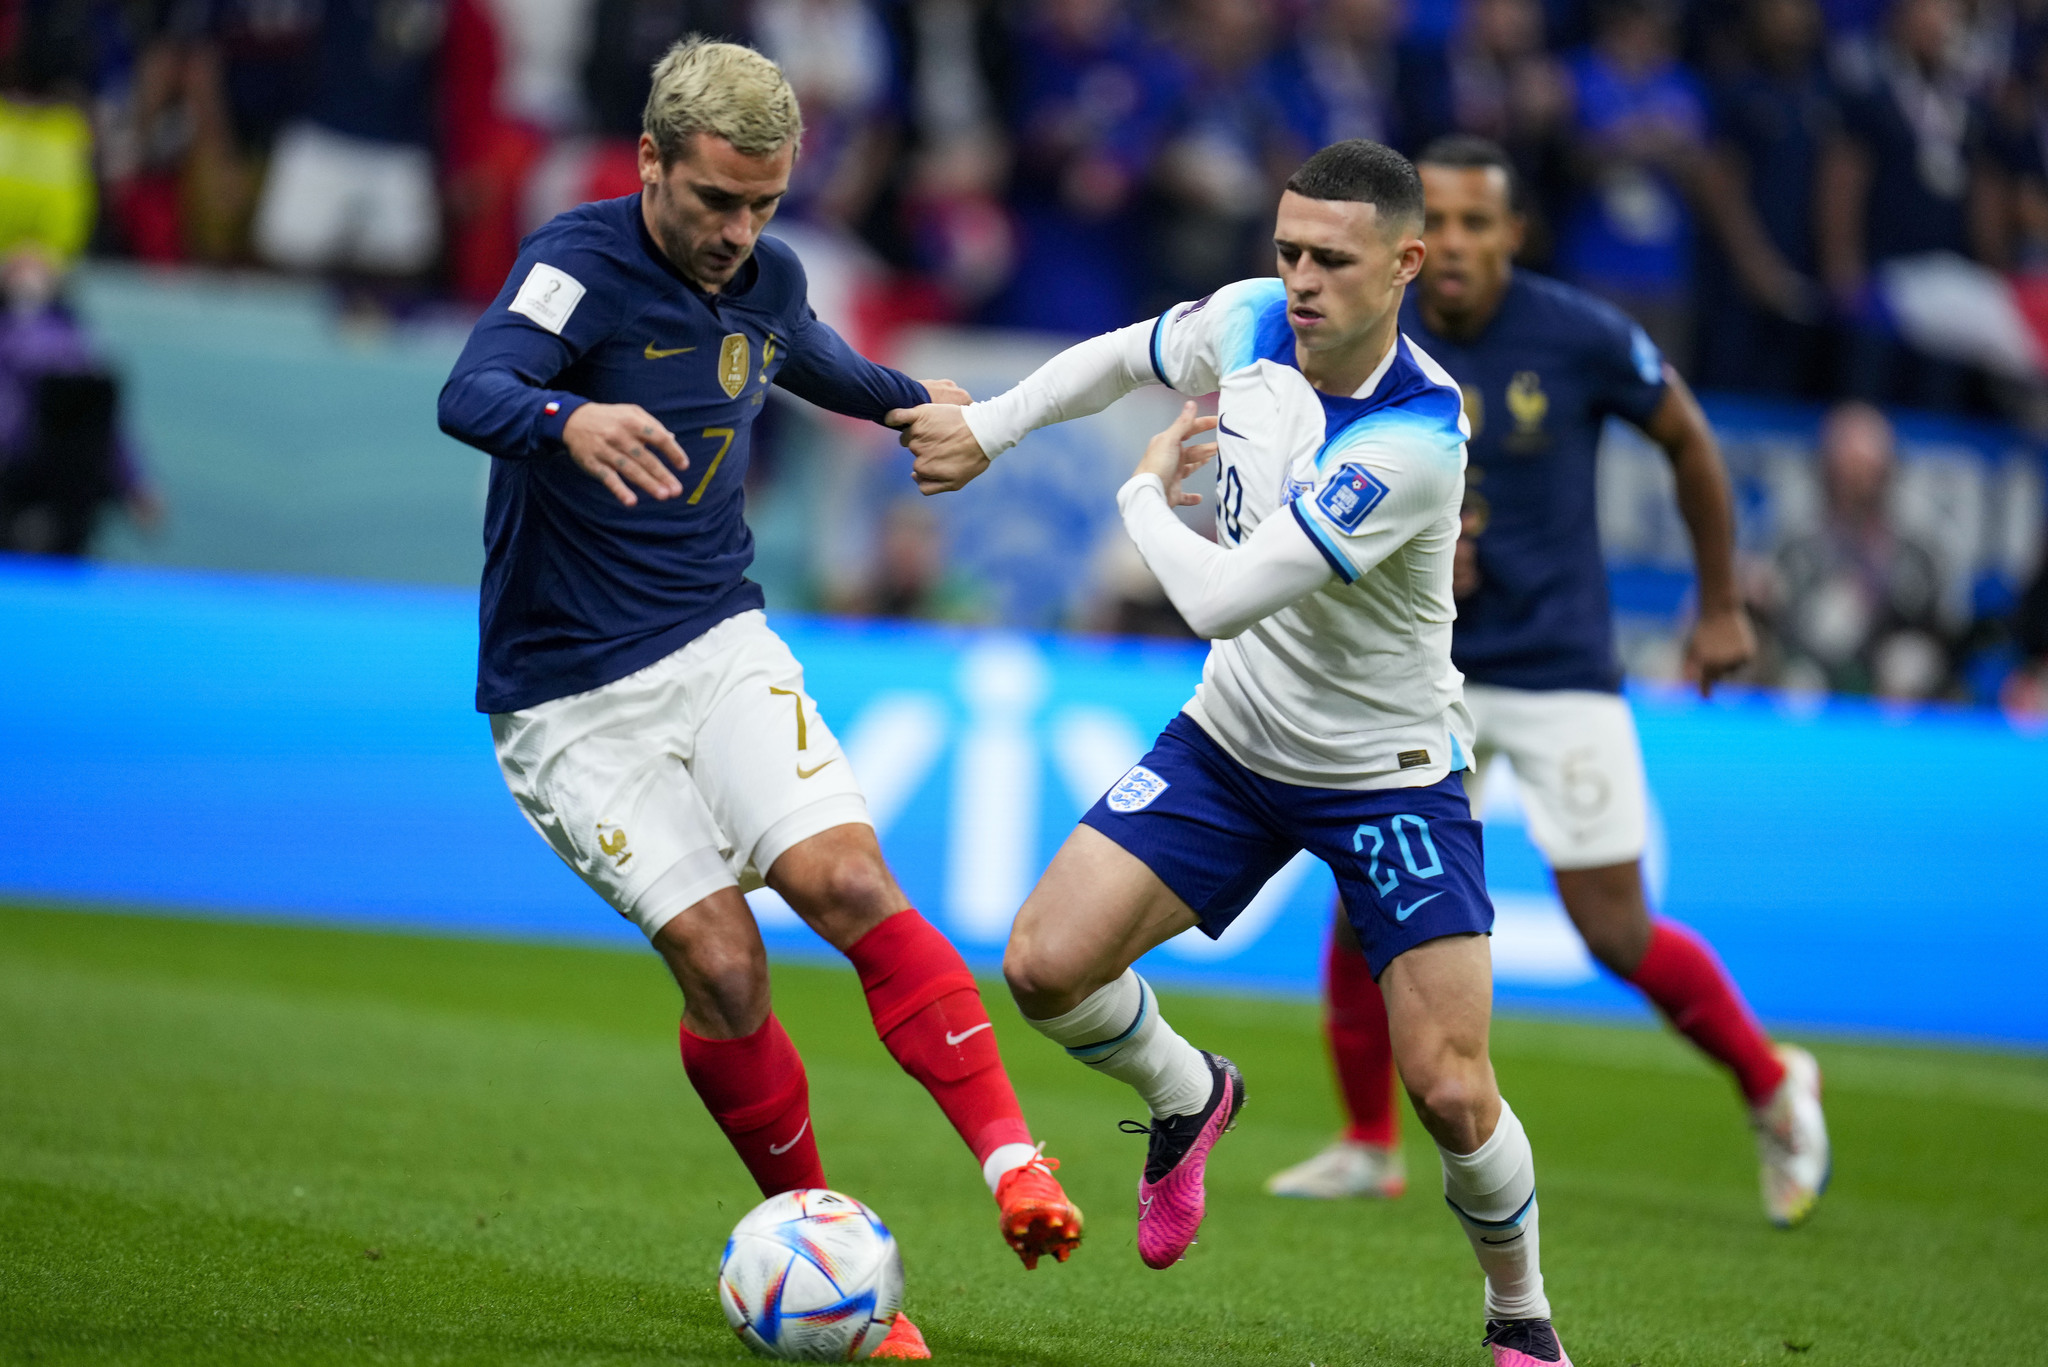 France's Antoine  lt;HIT gt;Griezmann lt;/HIT gt;, left, and England's Phil Foden battle for the ball during the World Cup quarterfinal soccer match between England and France, at the Al Bayt Stadium in Al Khor, Qatar, Saturday, Dec. 10, 2022. (AP Photo/Natacha Pisarenko)